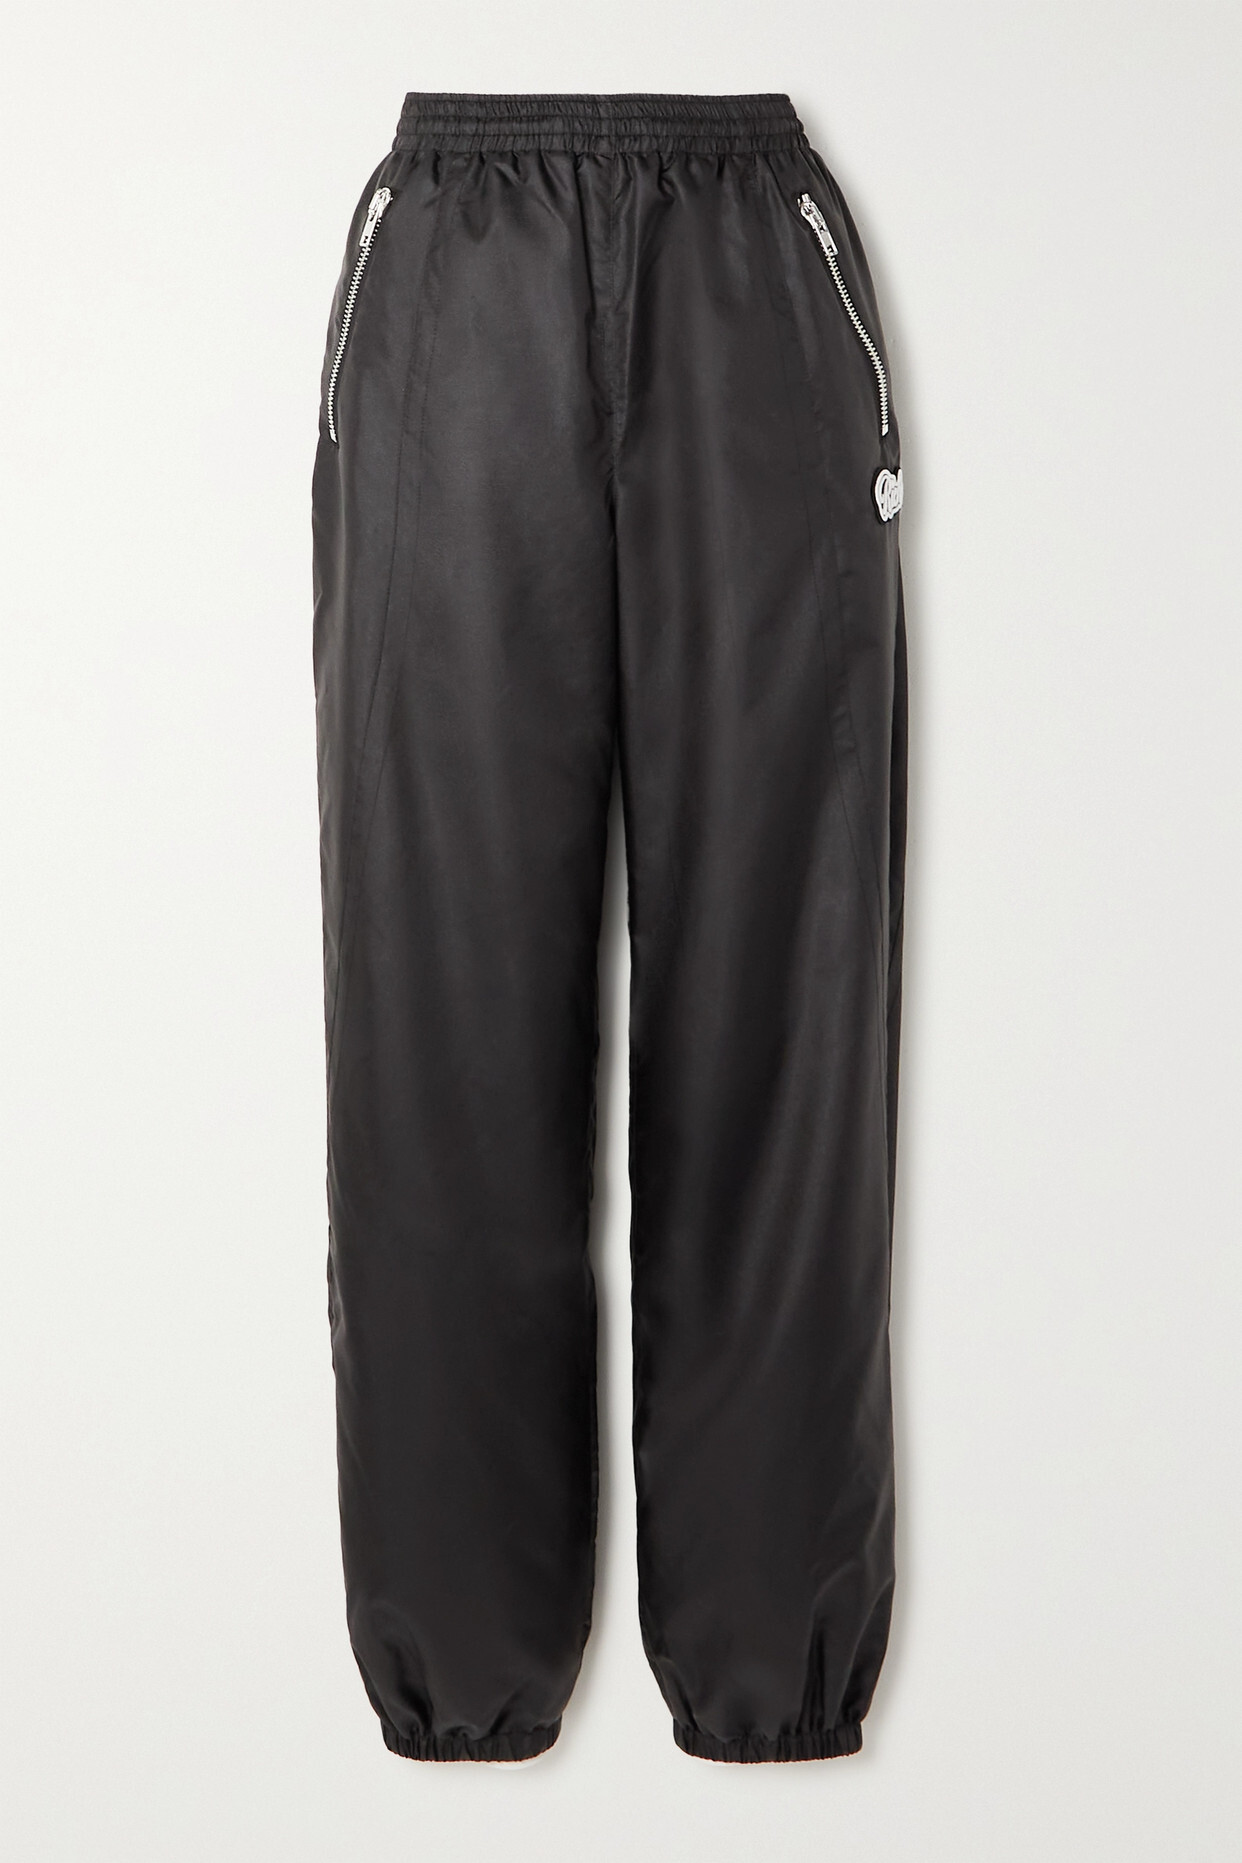 Alessandra Rich - Embroidered Shell Track Pants - Black